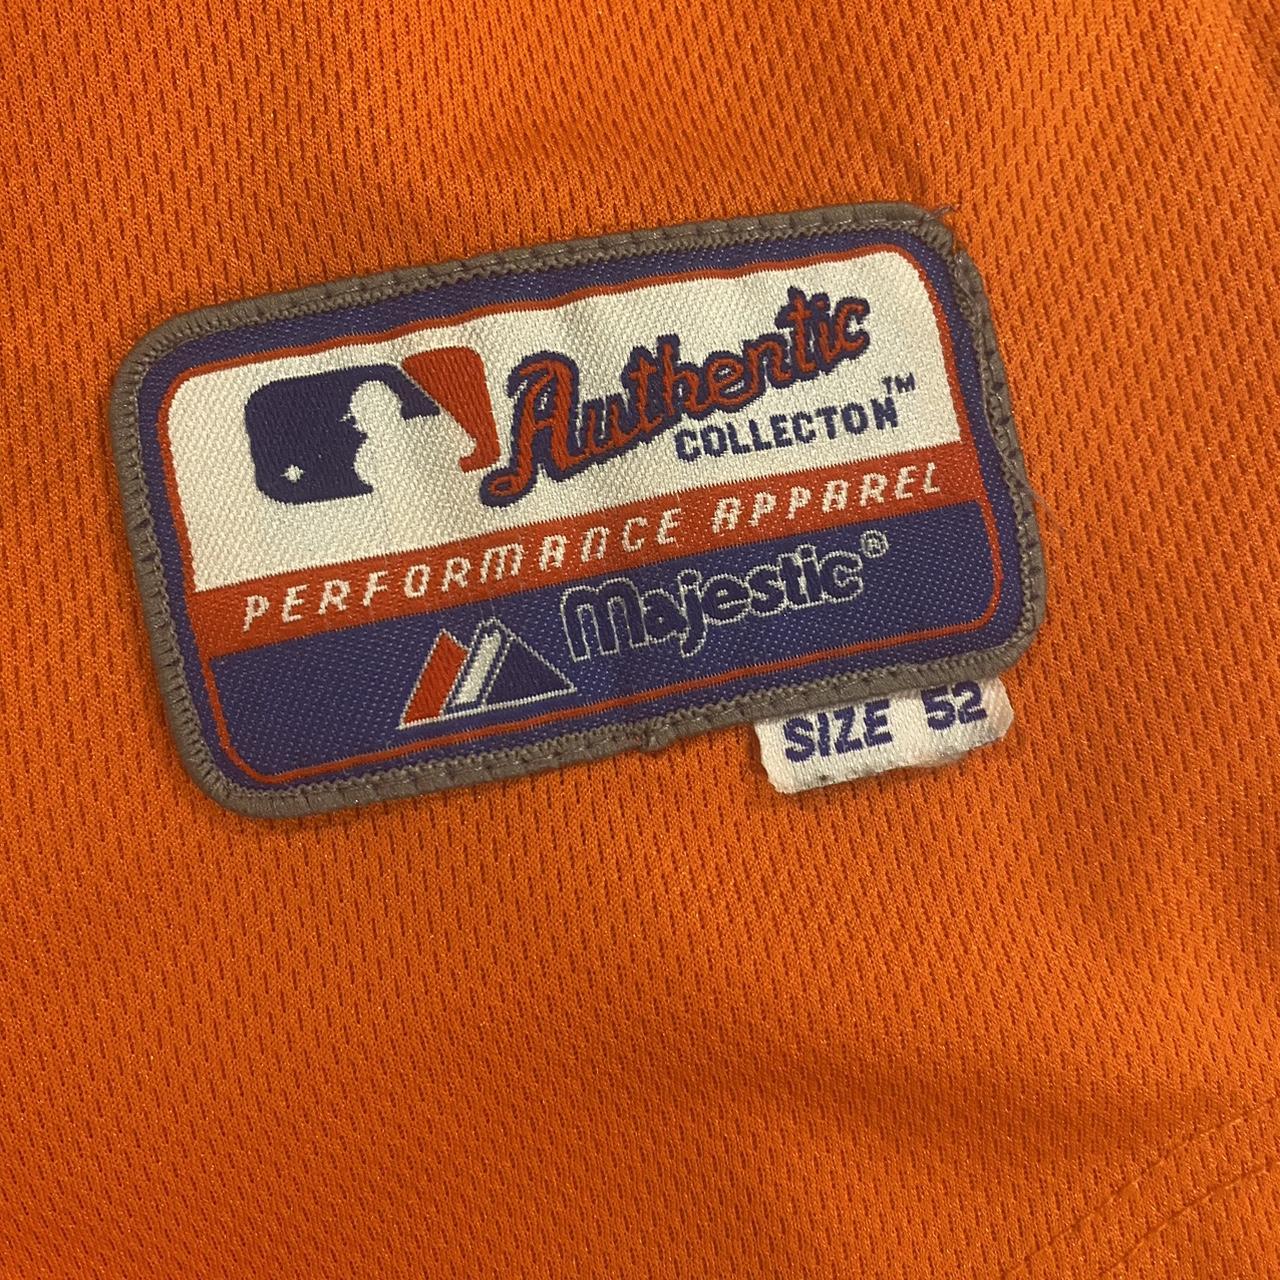 Authentic Orioles Manny Machado Jersey number - Depop